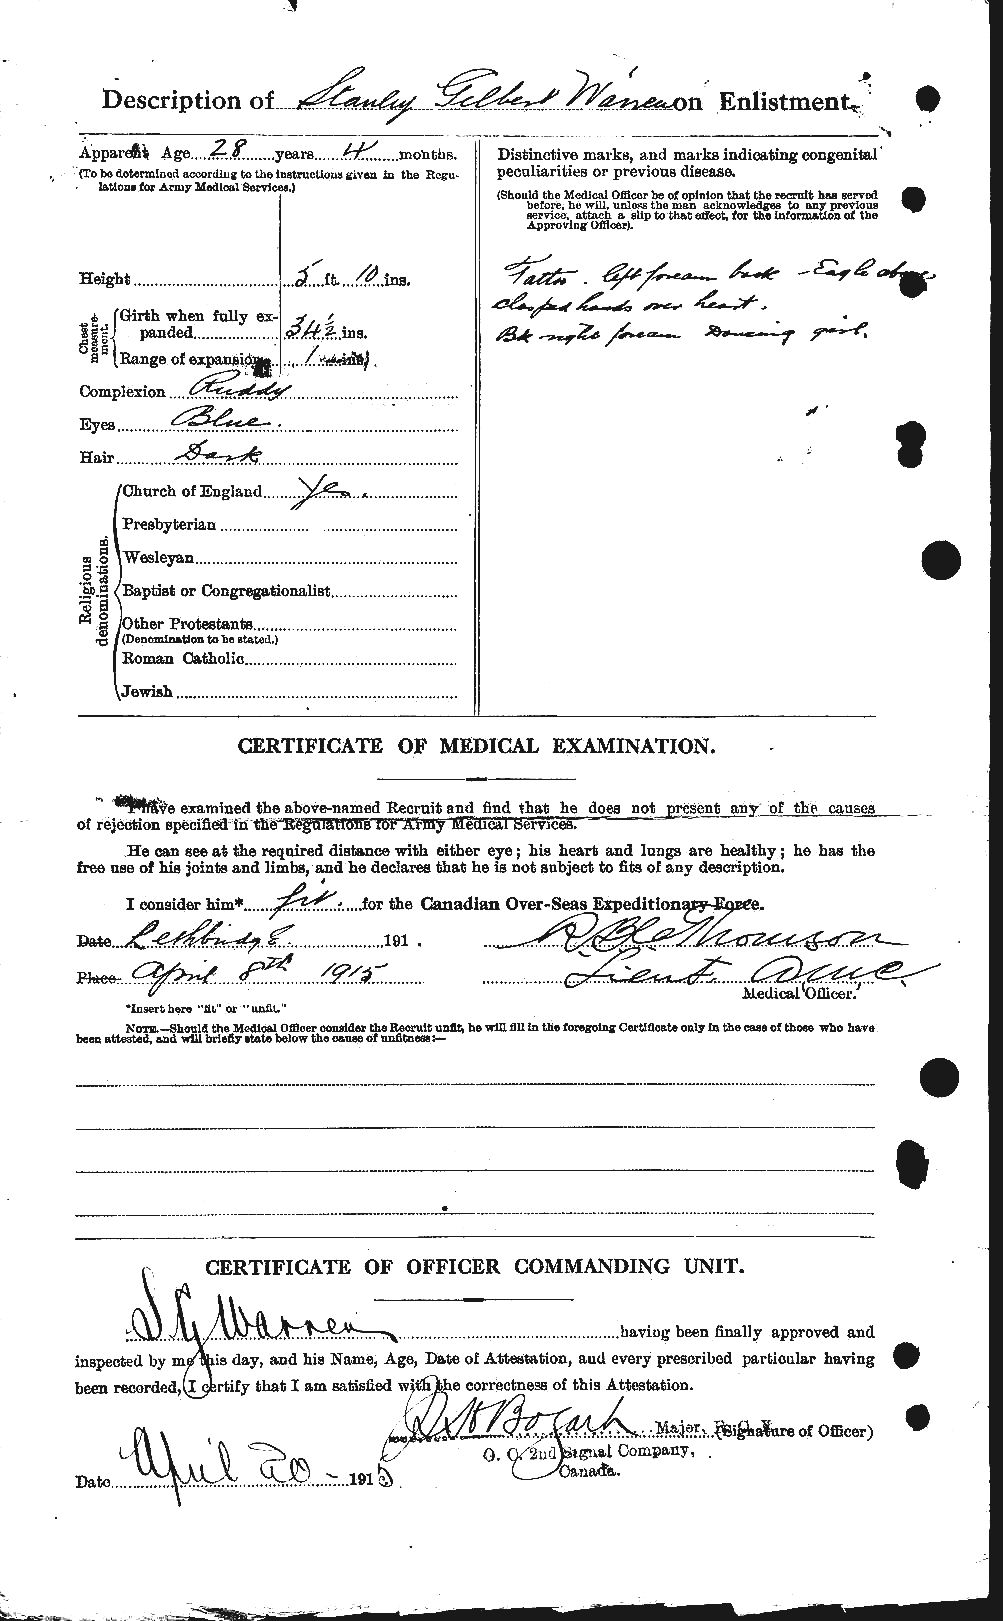 Personnel Records of the First World War - CEF 658638b